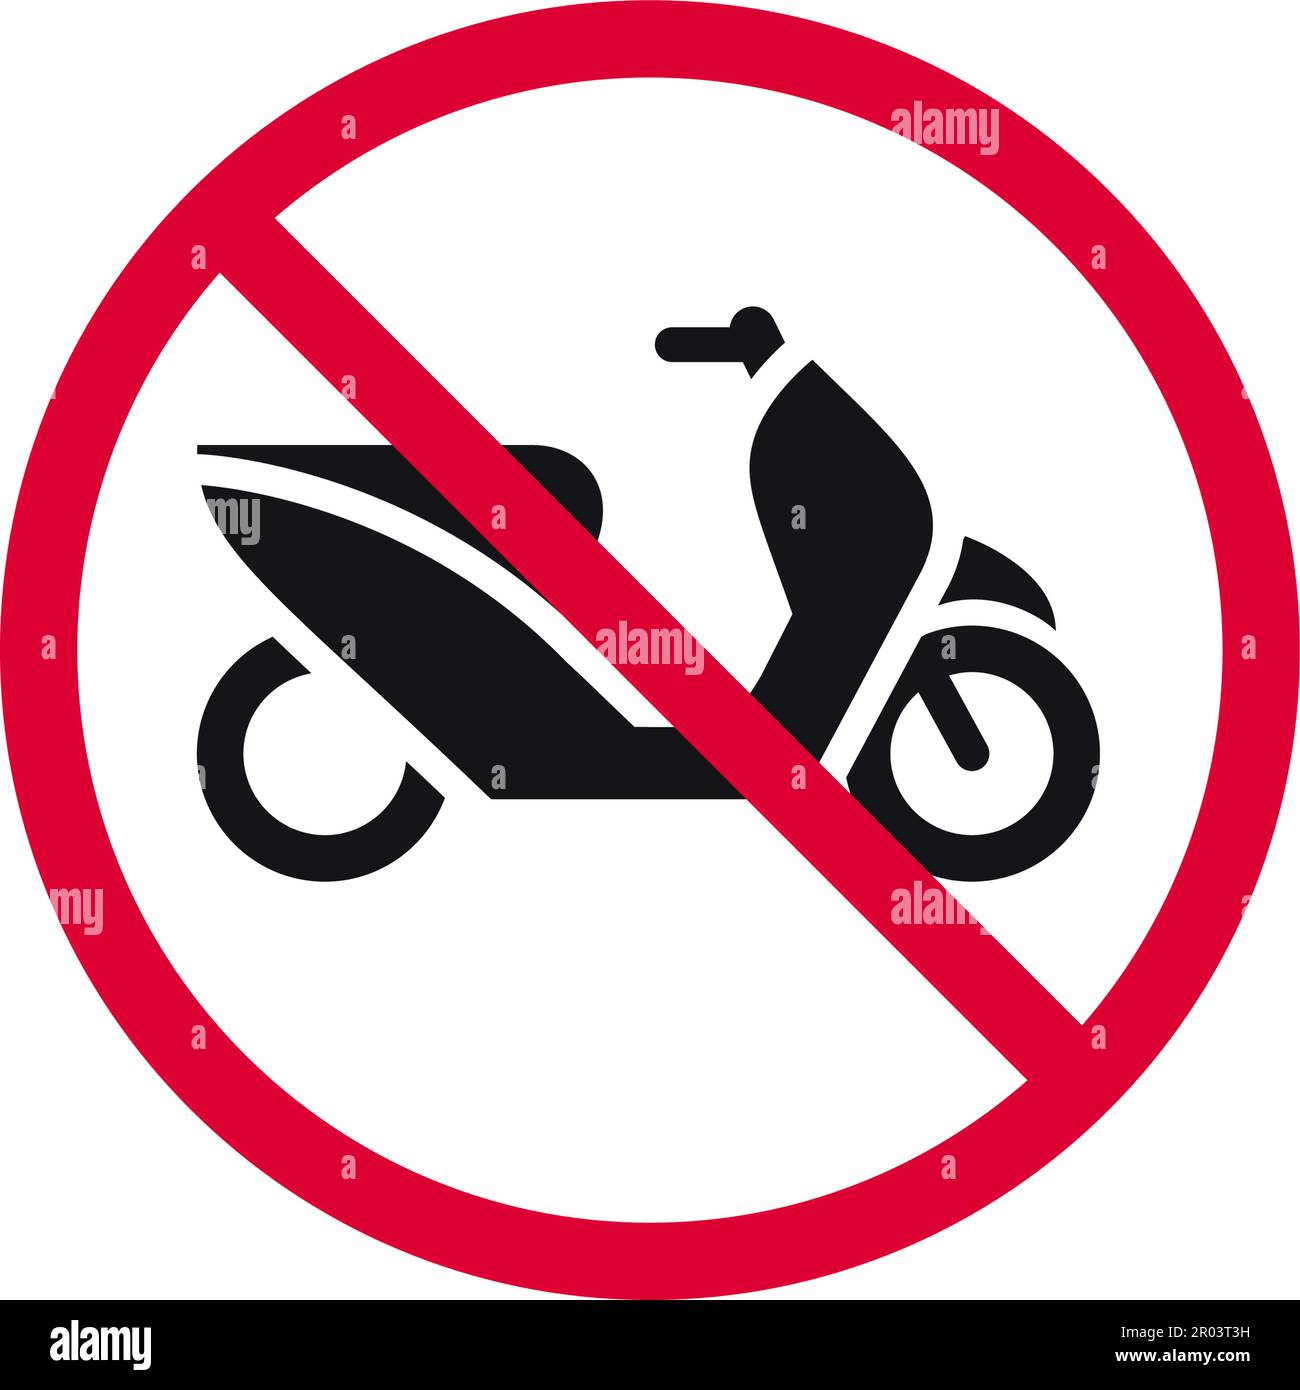 https://c8.alamy.com/comp/2R03T3H/no-parking-scooter-rohibited-sign-retro-moped-forbidden-modern-round-sticker-vector-illustration-2R03T3H.jpg